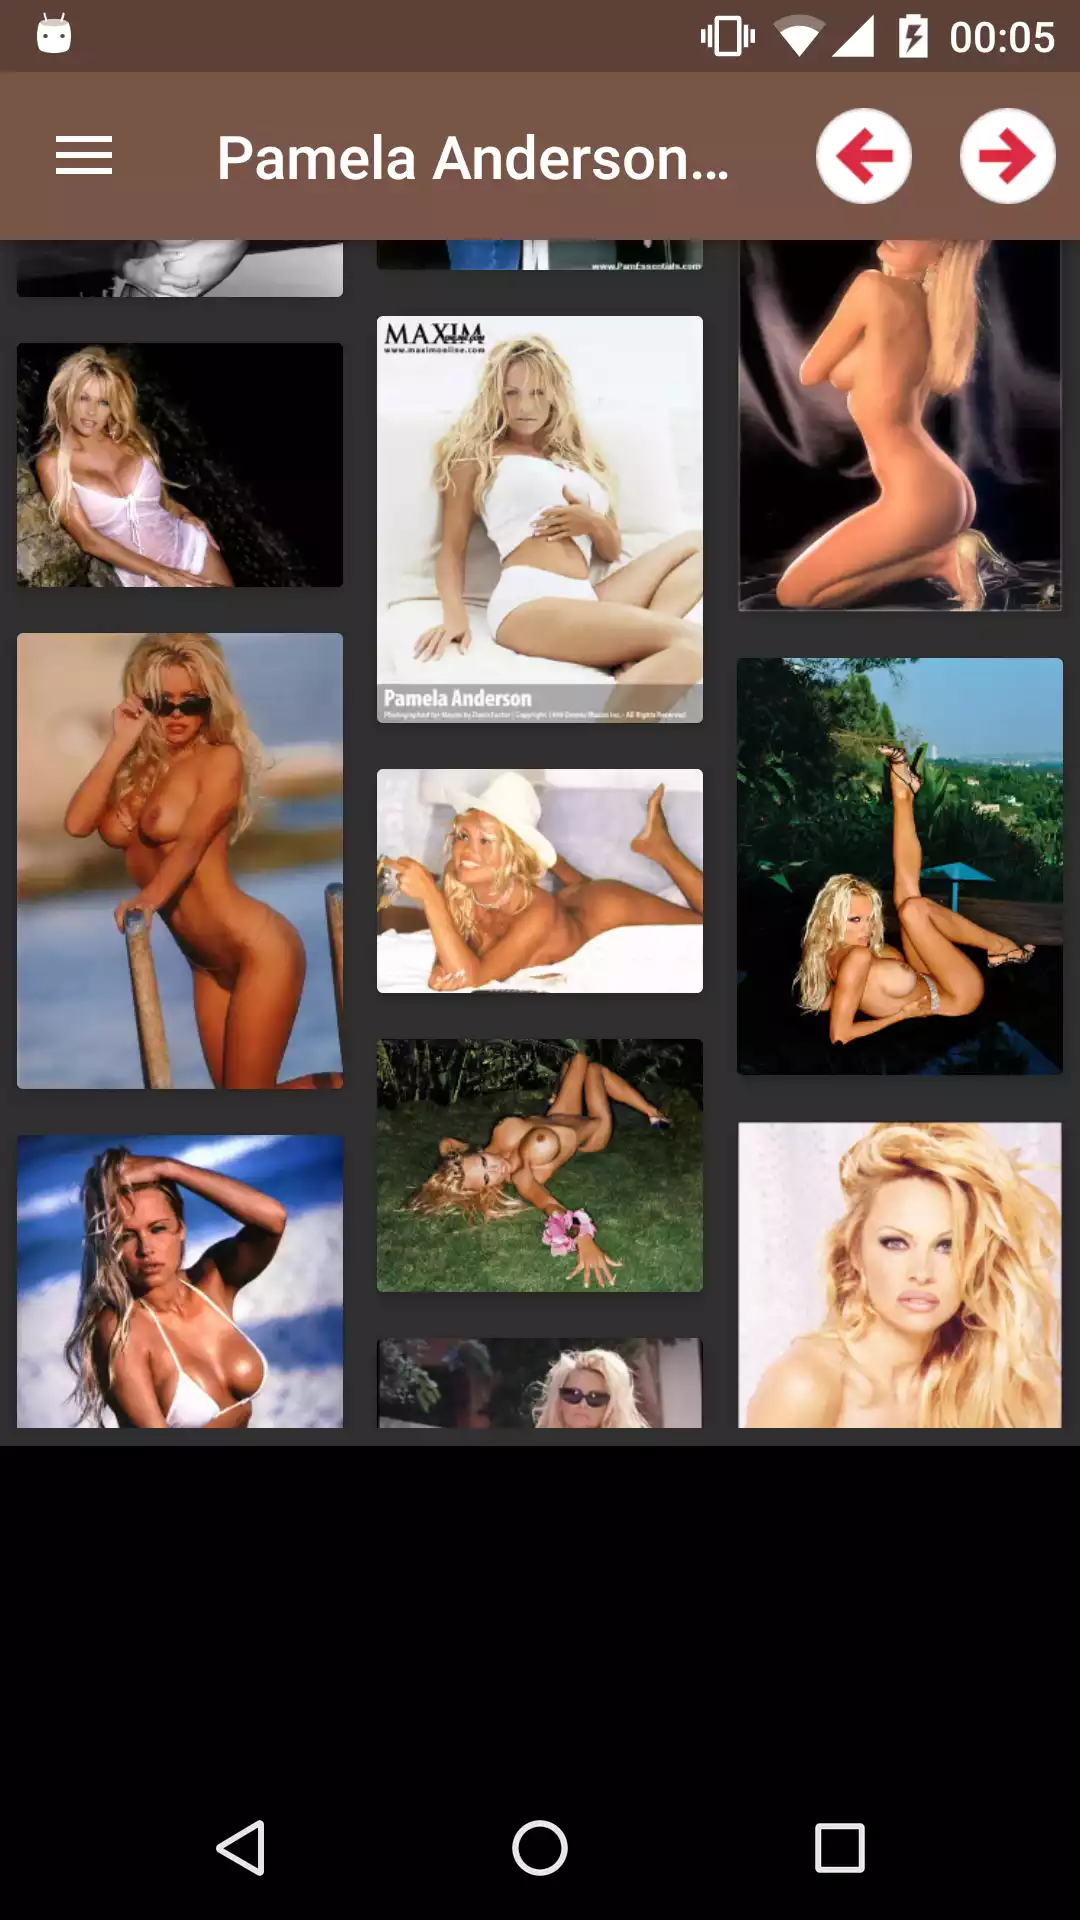 Pamela Anderson backgrounds sex,porn,android,excuses,for,anime,photos,backgrounds,pornstar,sexy,lair,adult,erotic,mythras,lovely,app,application,image,stacy,wallpaper,wallpapers,saxy,apk,anderson,hentay,pamela,editor,hentai,adams,photo,watching,appa